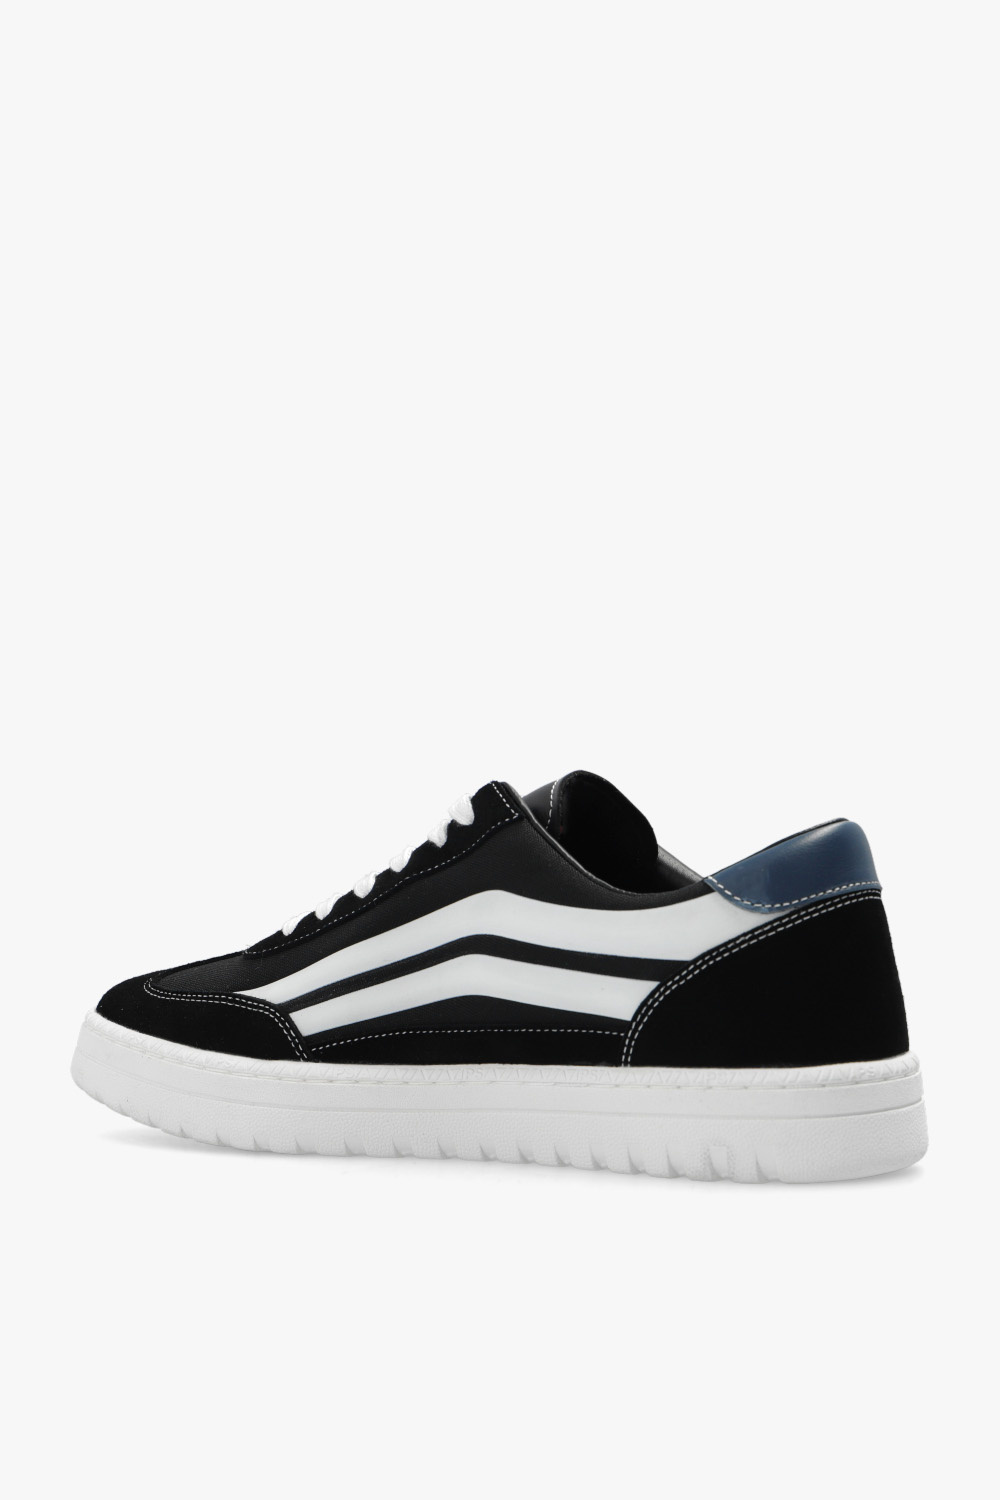 PS Paul Smith ‘Park’ sneakers